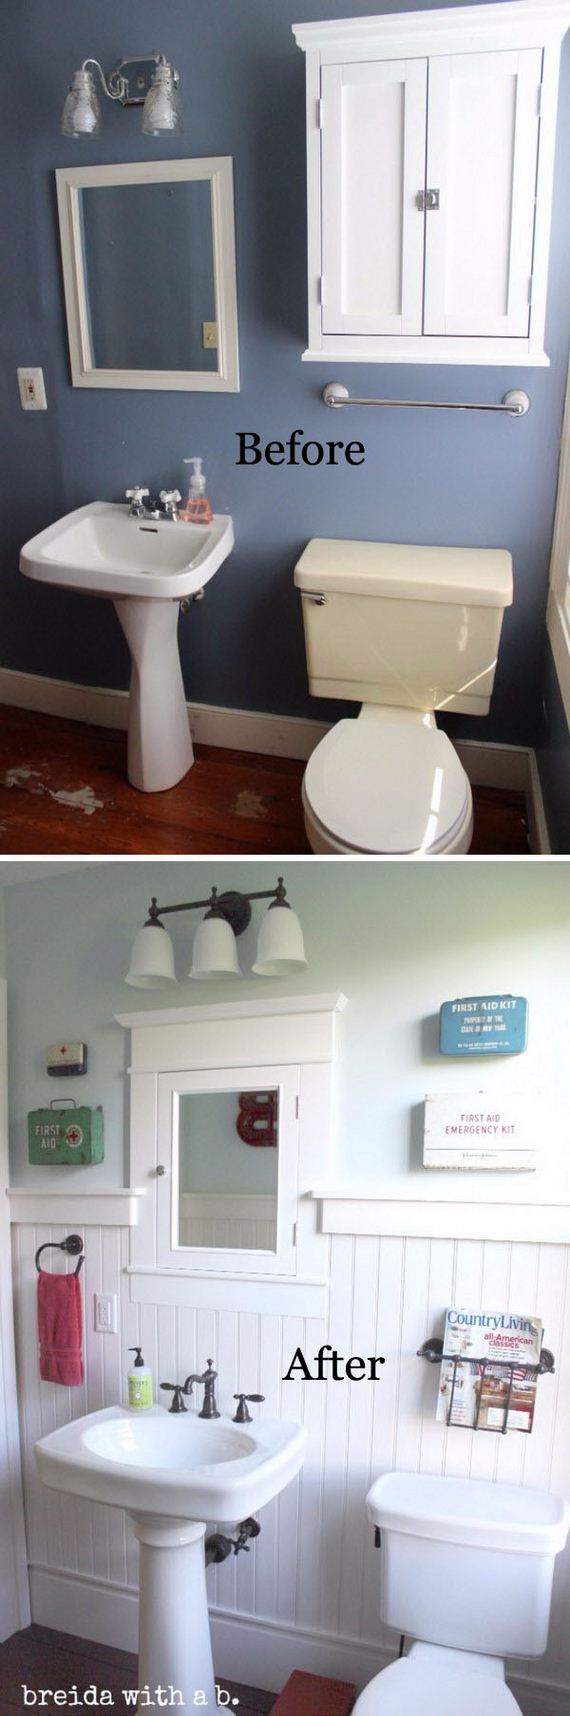 24-awesome-bathroom-makeovers